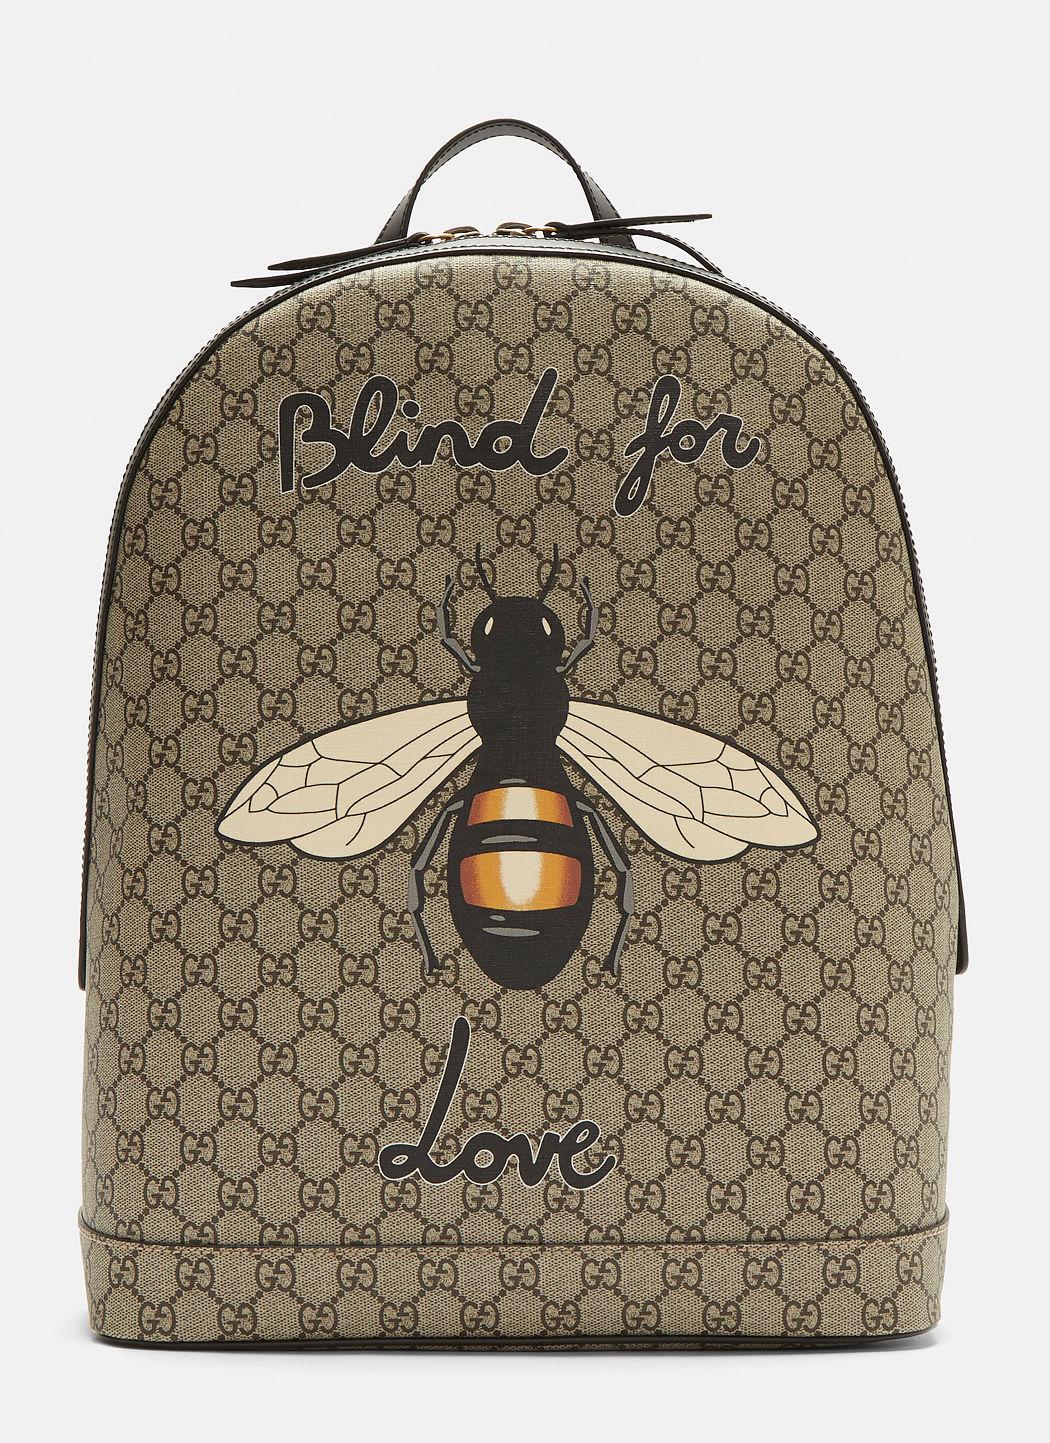 Gucci Bee Print Gg Supreme Backpack In Brown | ModeSens